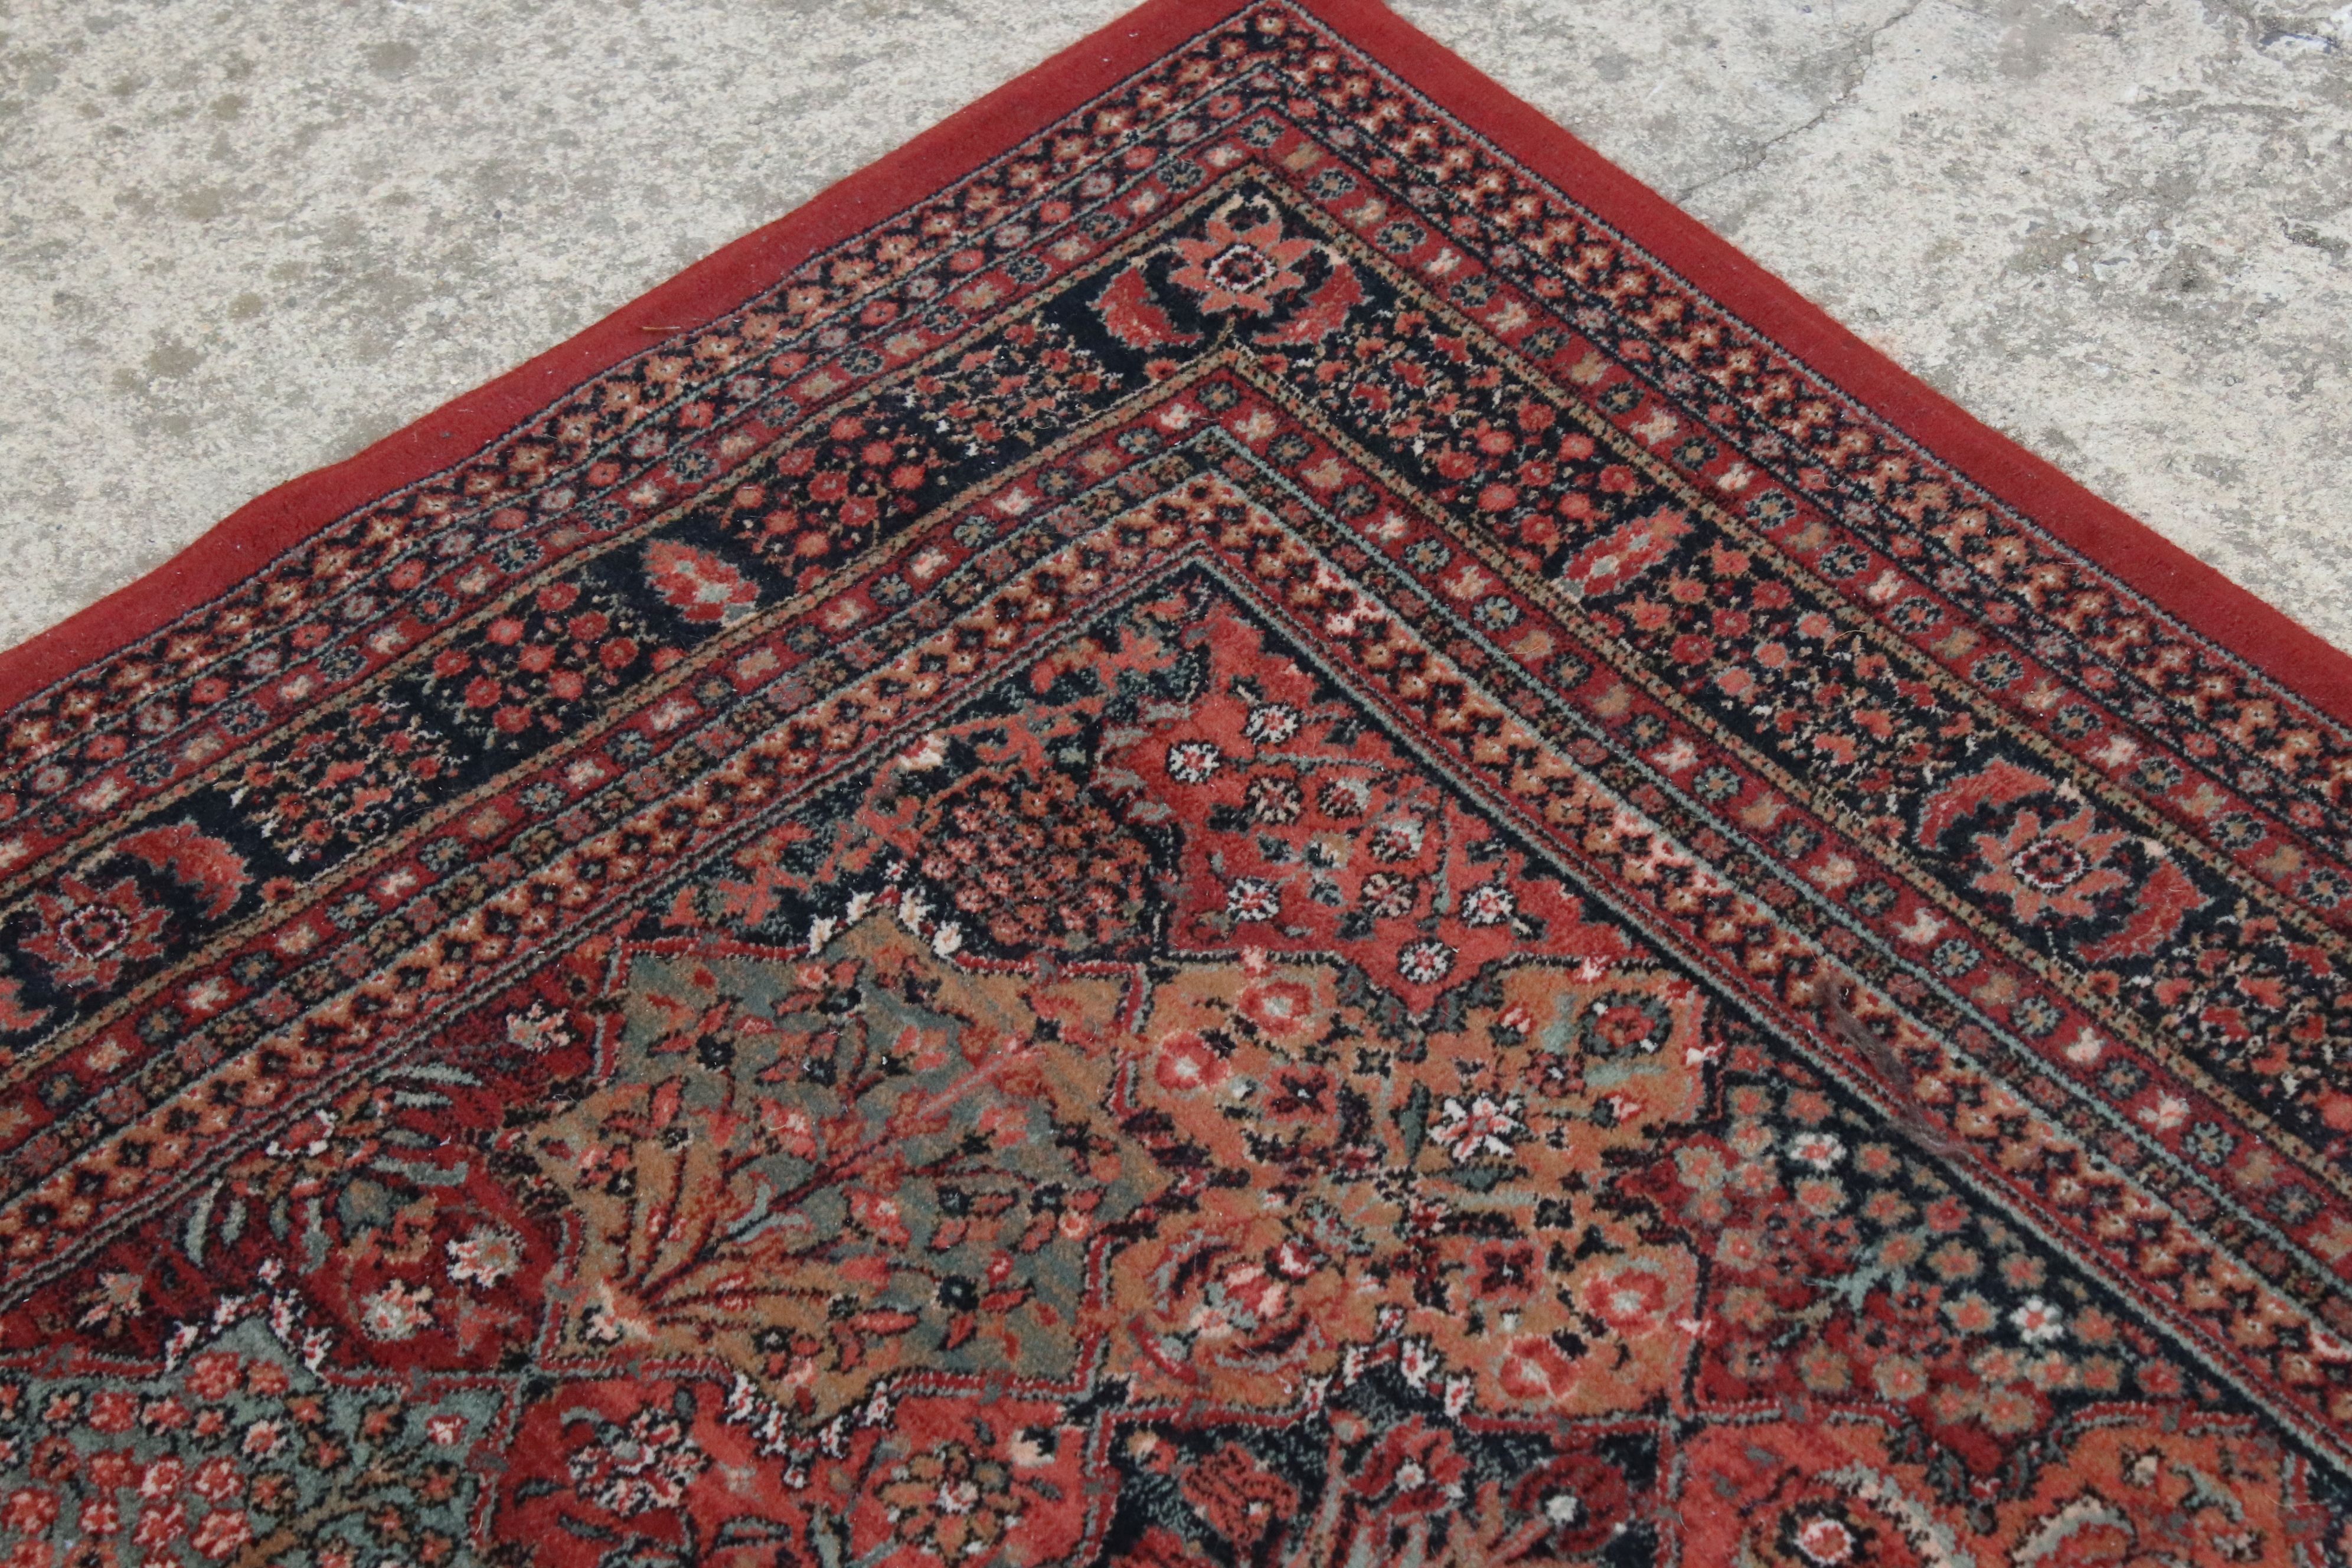 Red Ground Rug retailed by John Lewis, 240cm x 160cm - Image 4 of 4